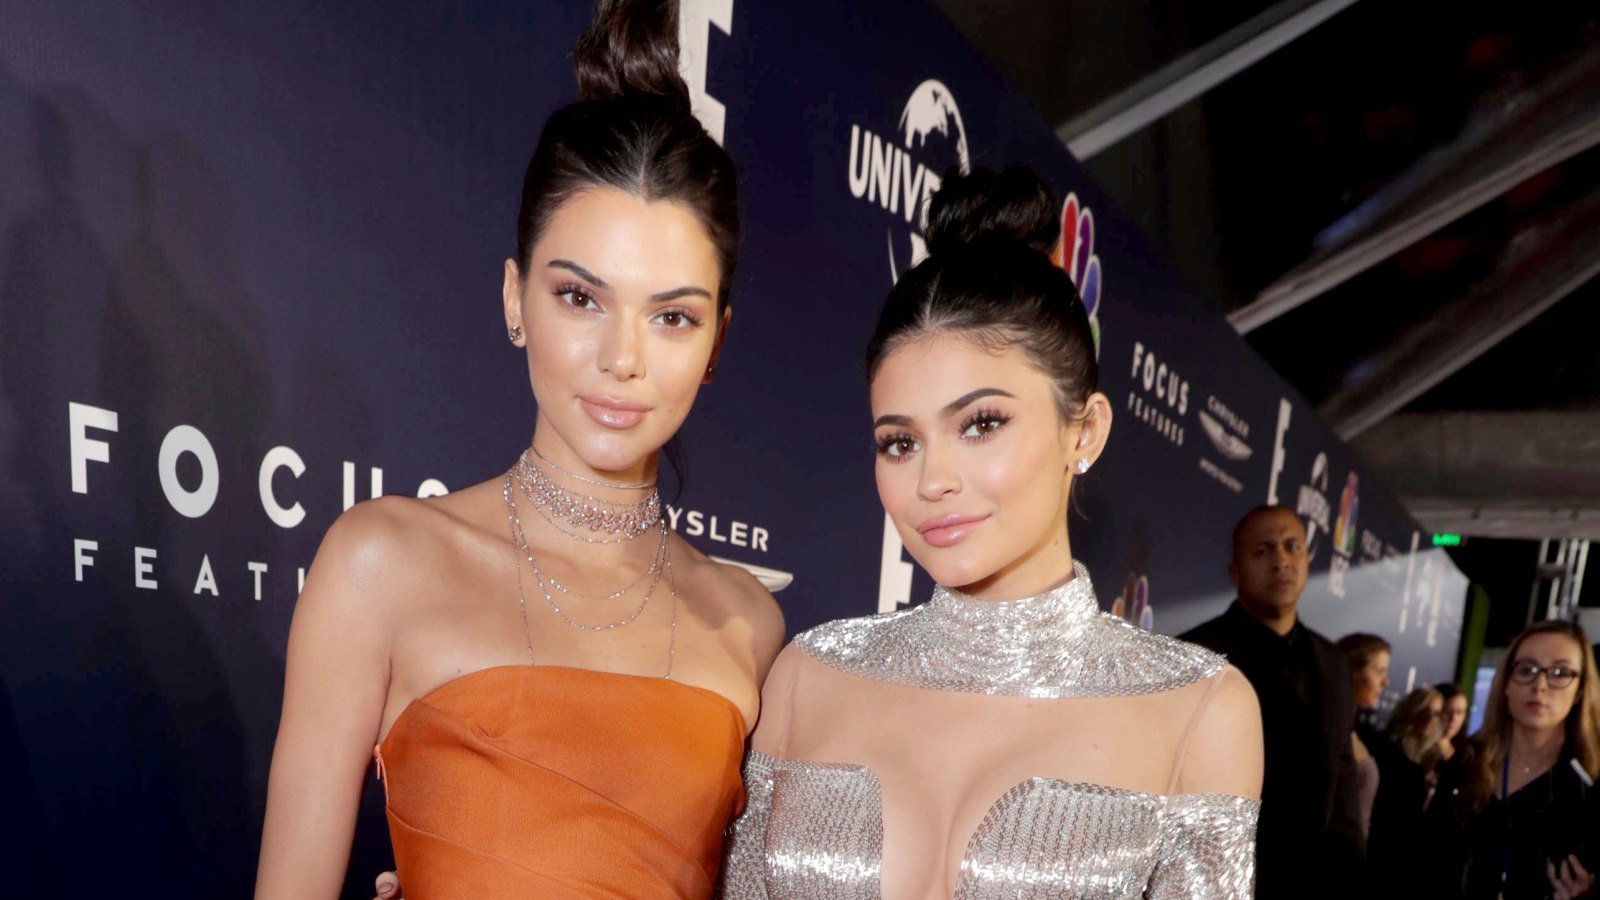 Kendall Jenner Jokes That She Is Fighting With Kylie Jenner Over Fai Khadra